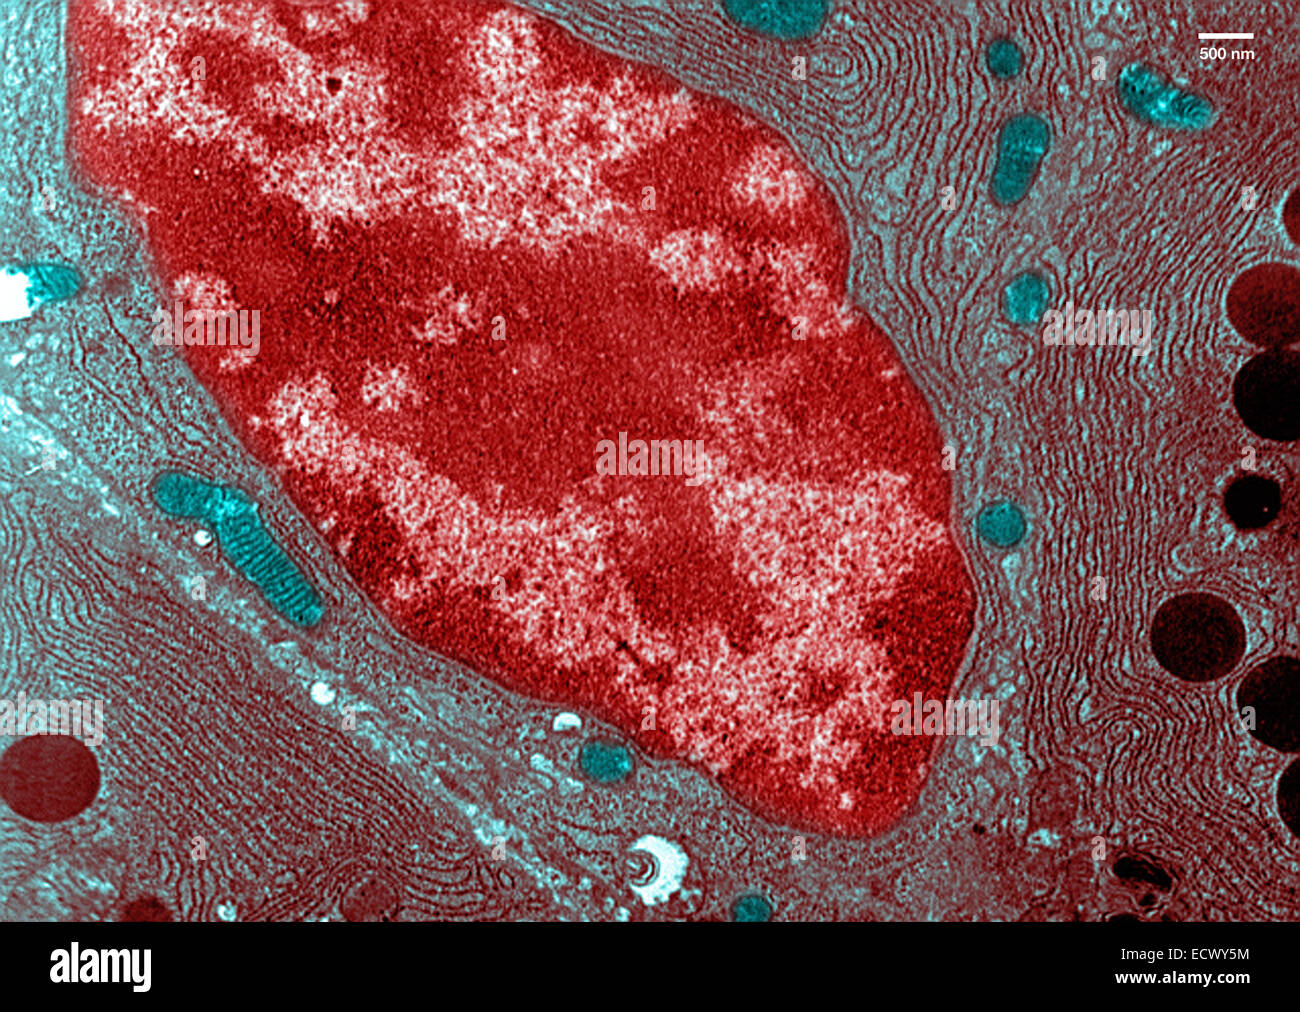 Transmission electron microscope image of pancreatic cells. Stock Photo